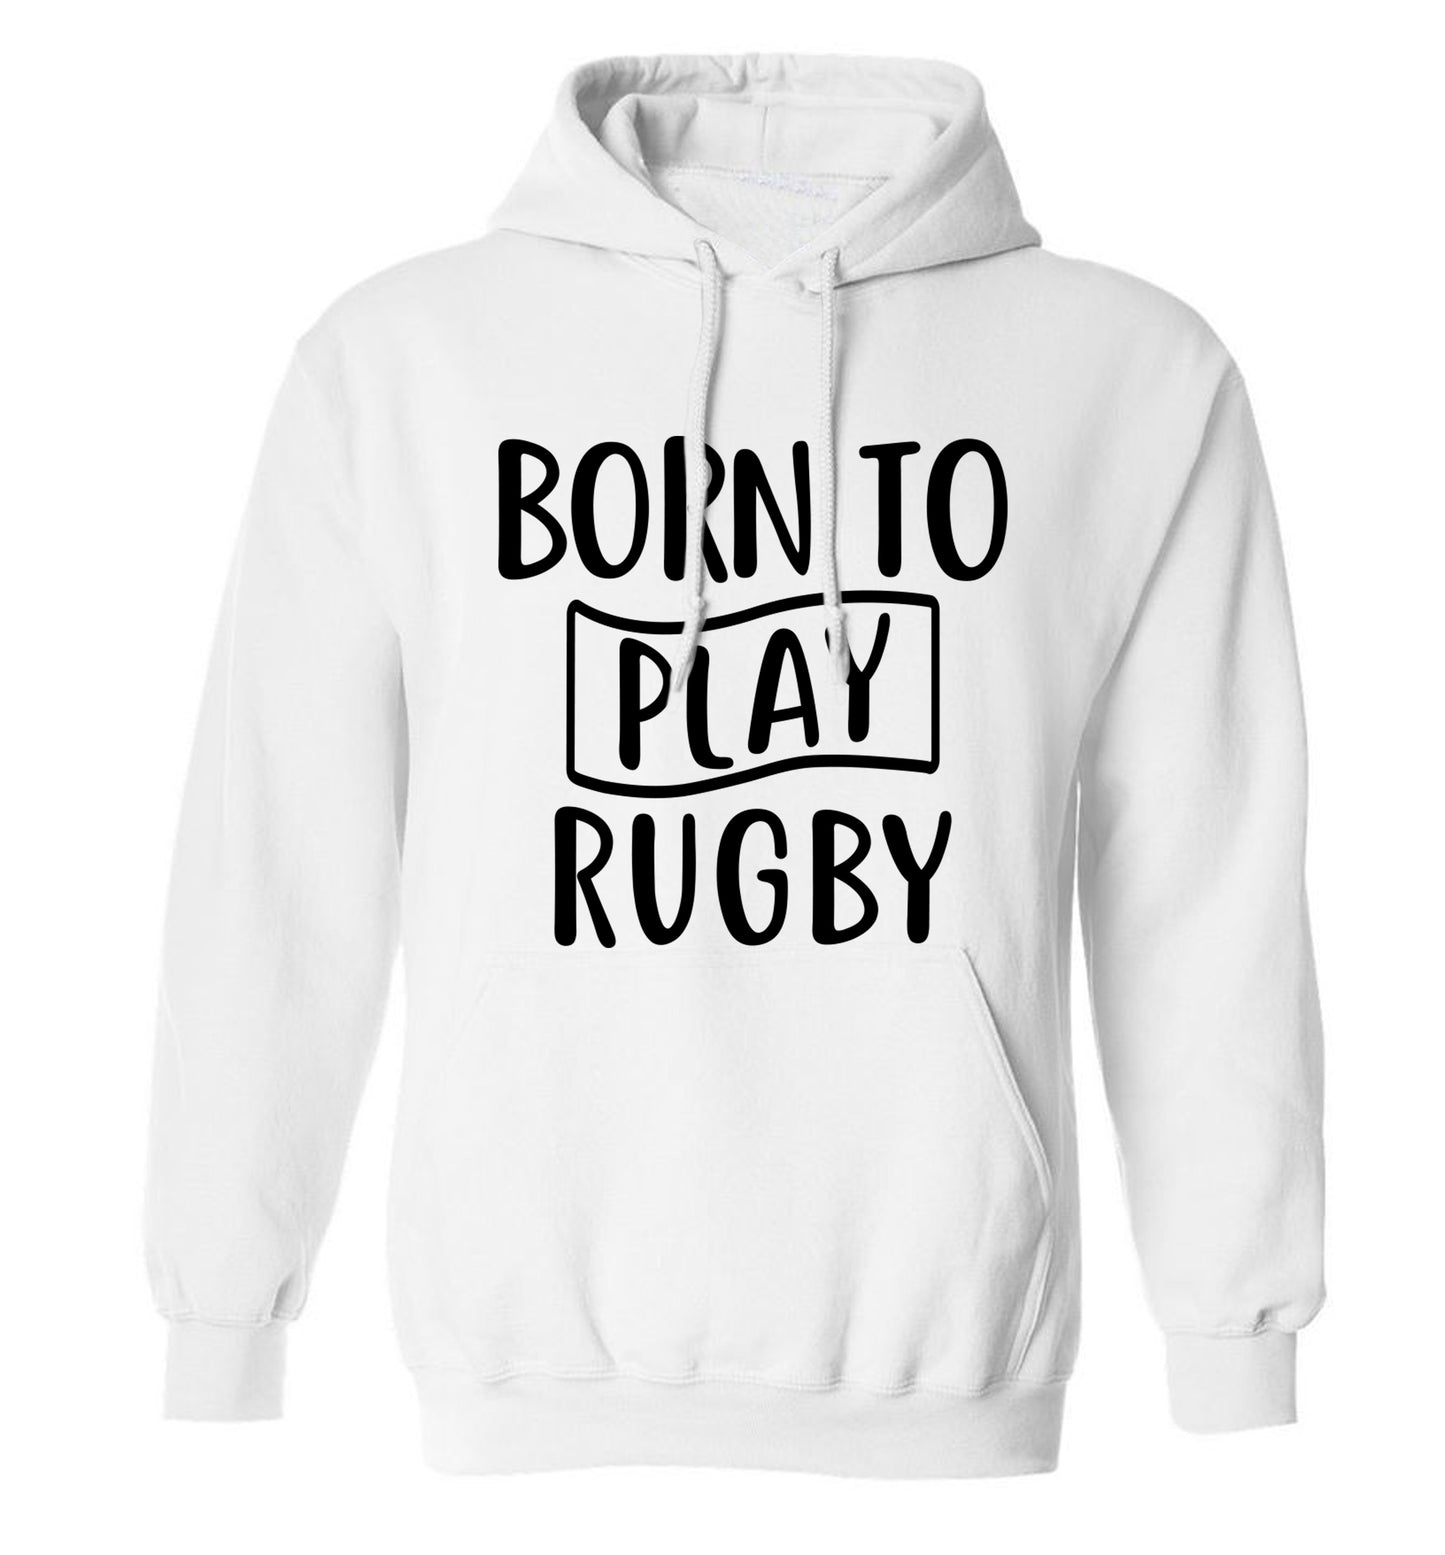 Born to play rugby adults unisex white hoodie 2XL